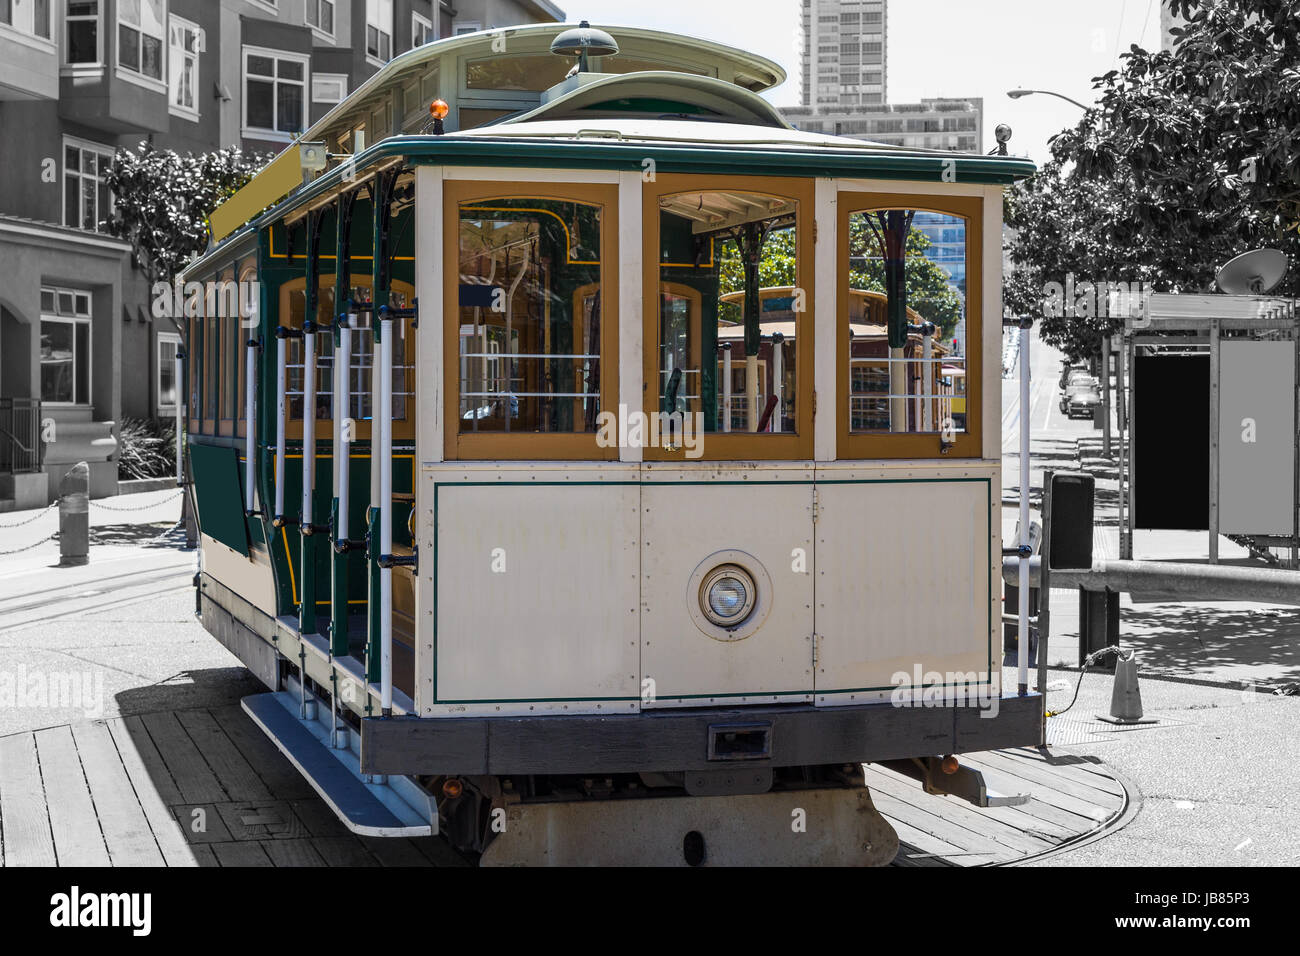 A view of a cable car turnaround in Fishermans Wharf Stock Photo